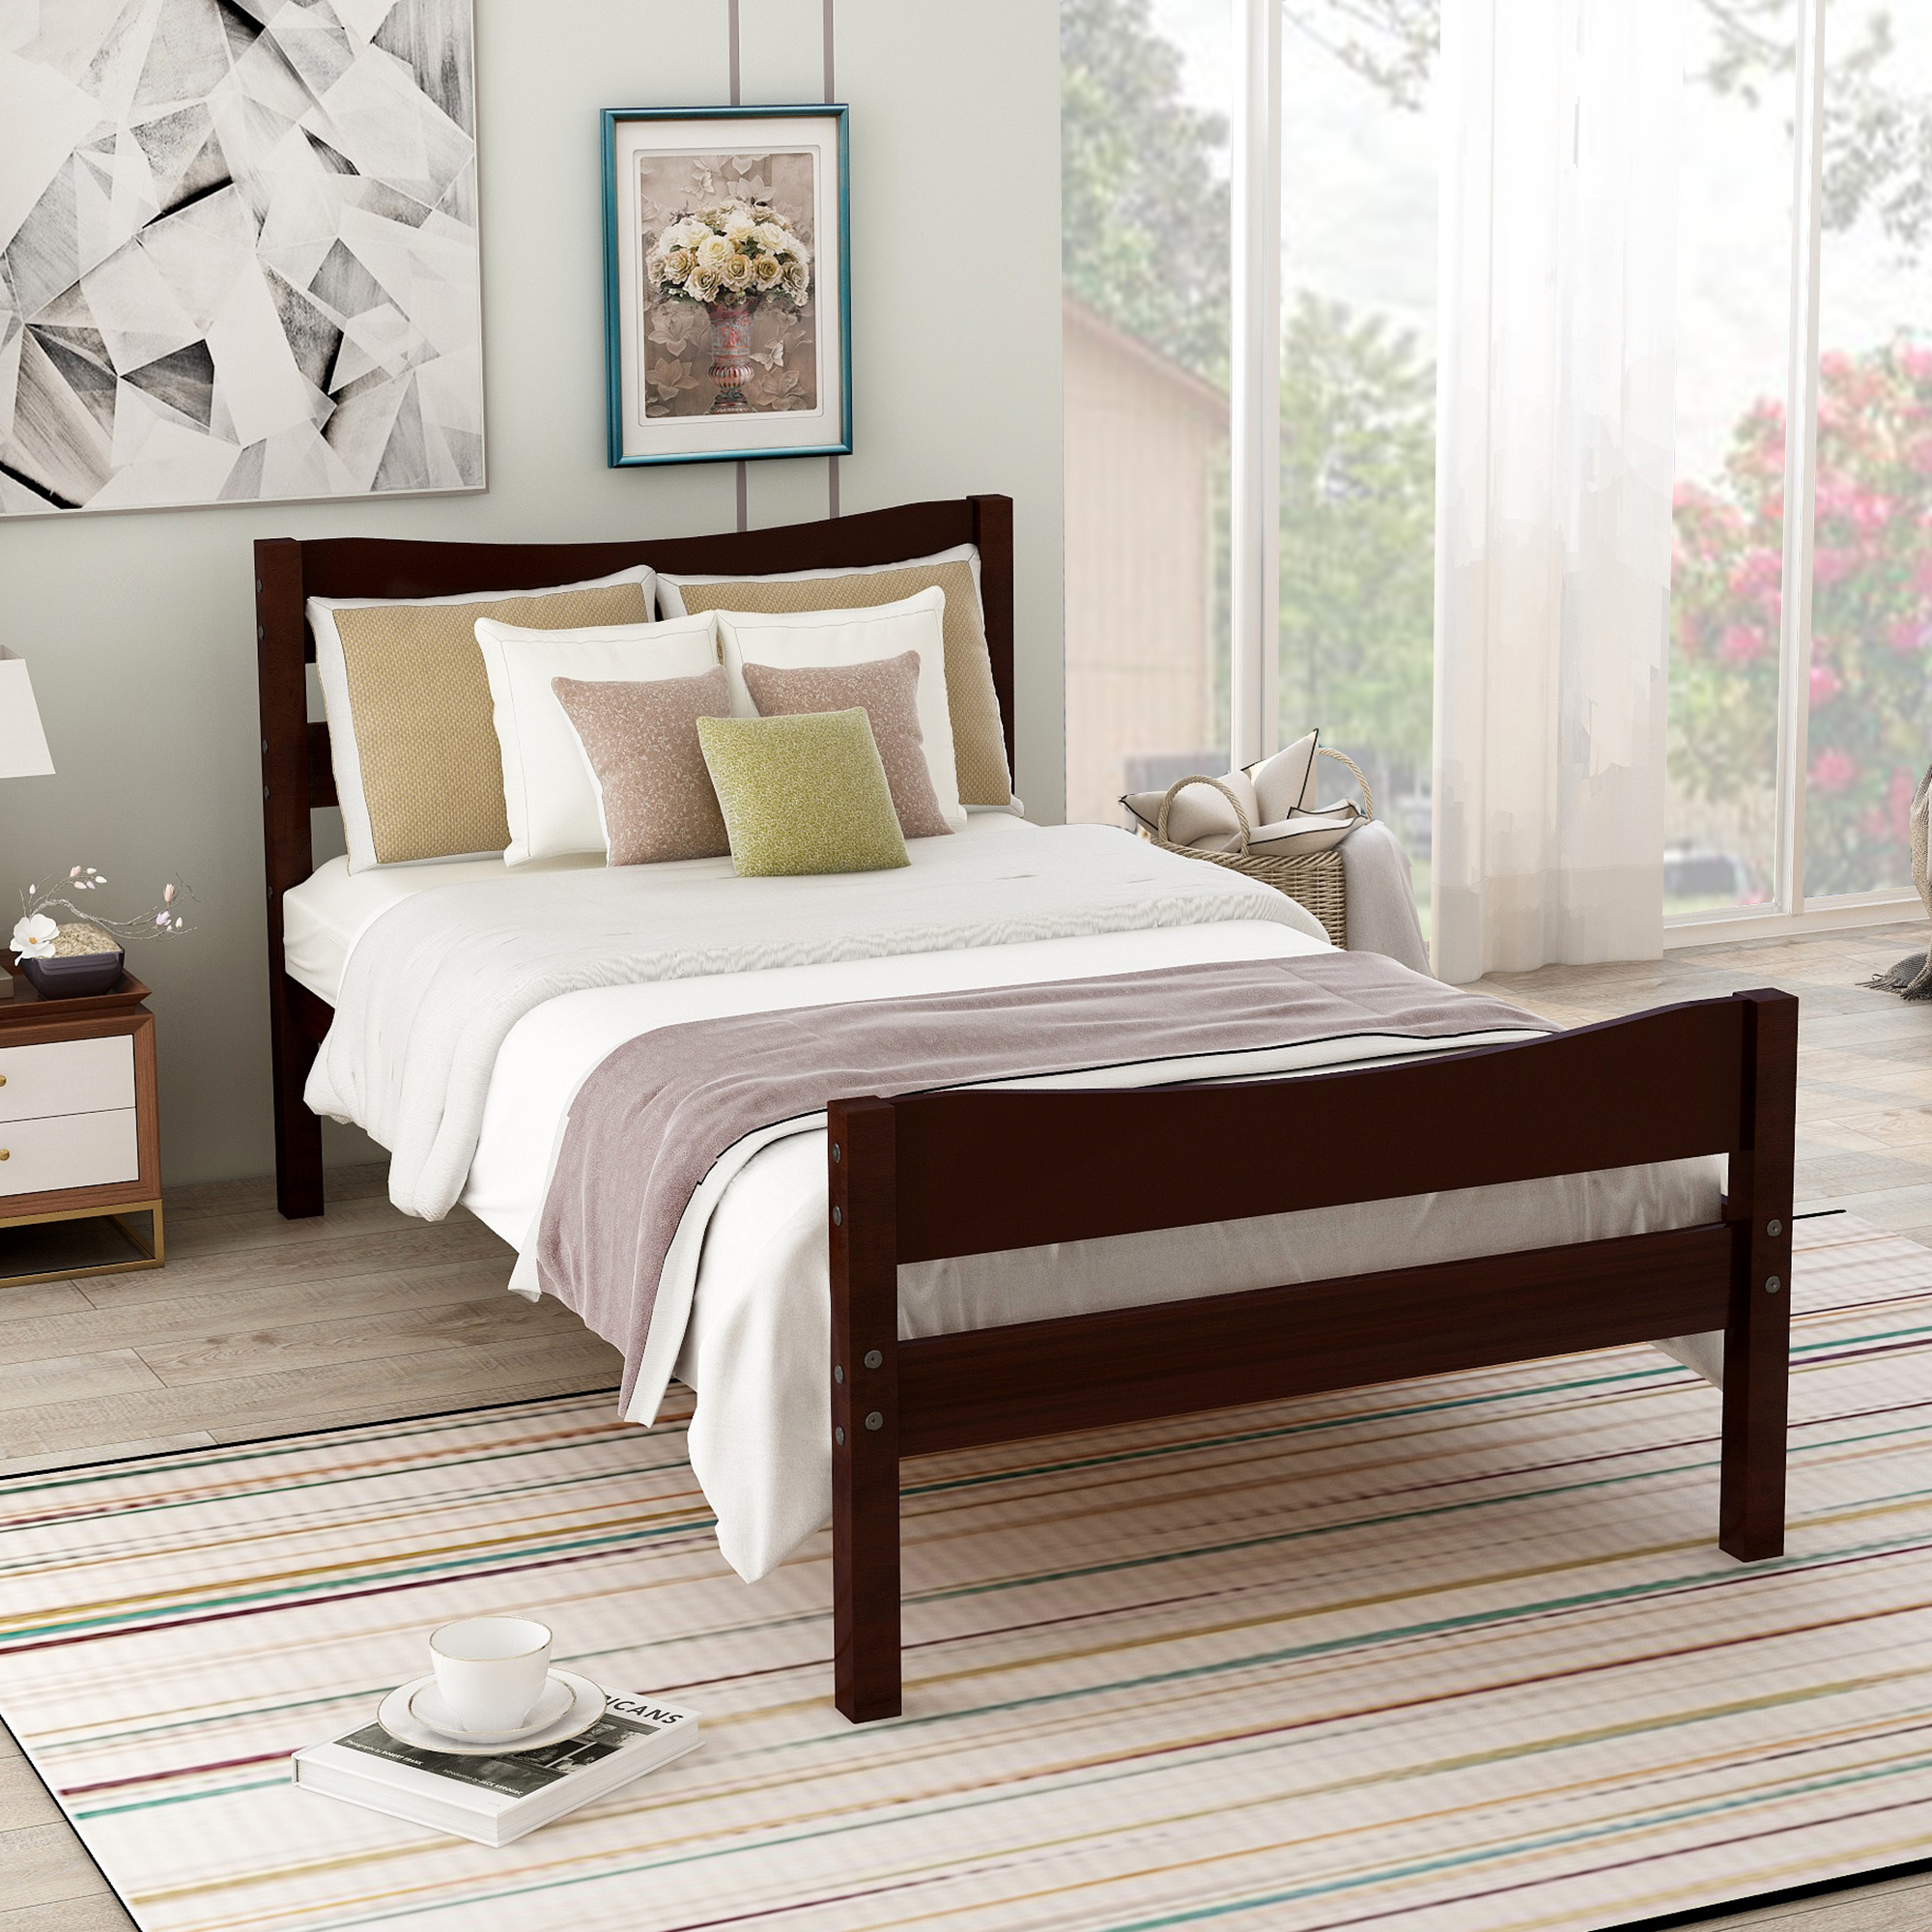 【Not allowed to sell to Walmart】Twin Size Wood Platform Bed with Headboard and Wooden Slat Support (Espresso)-Boyel Living